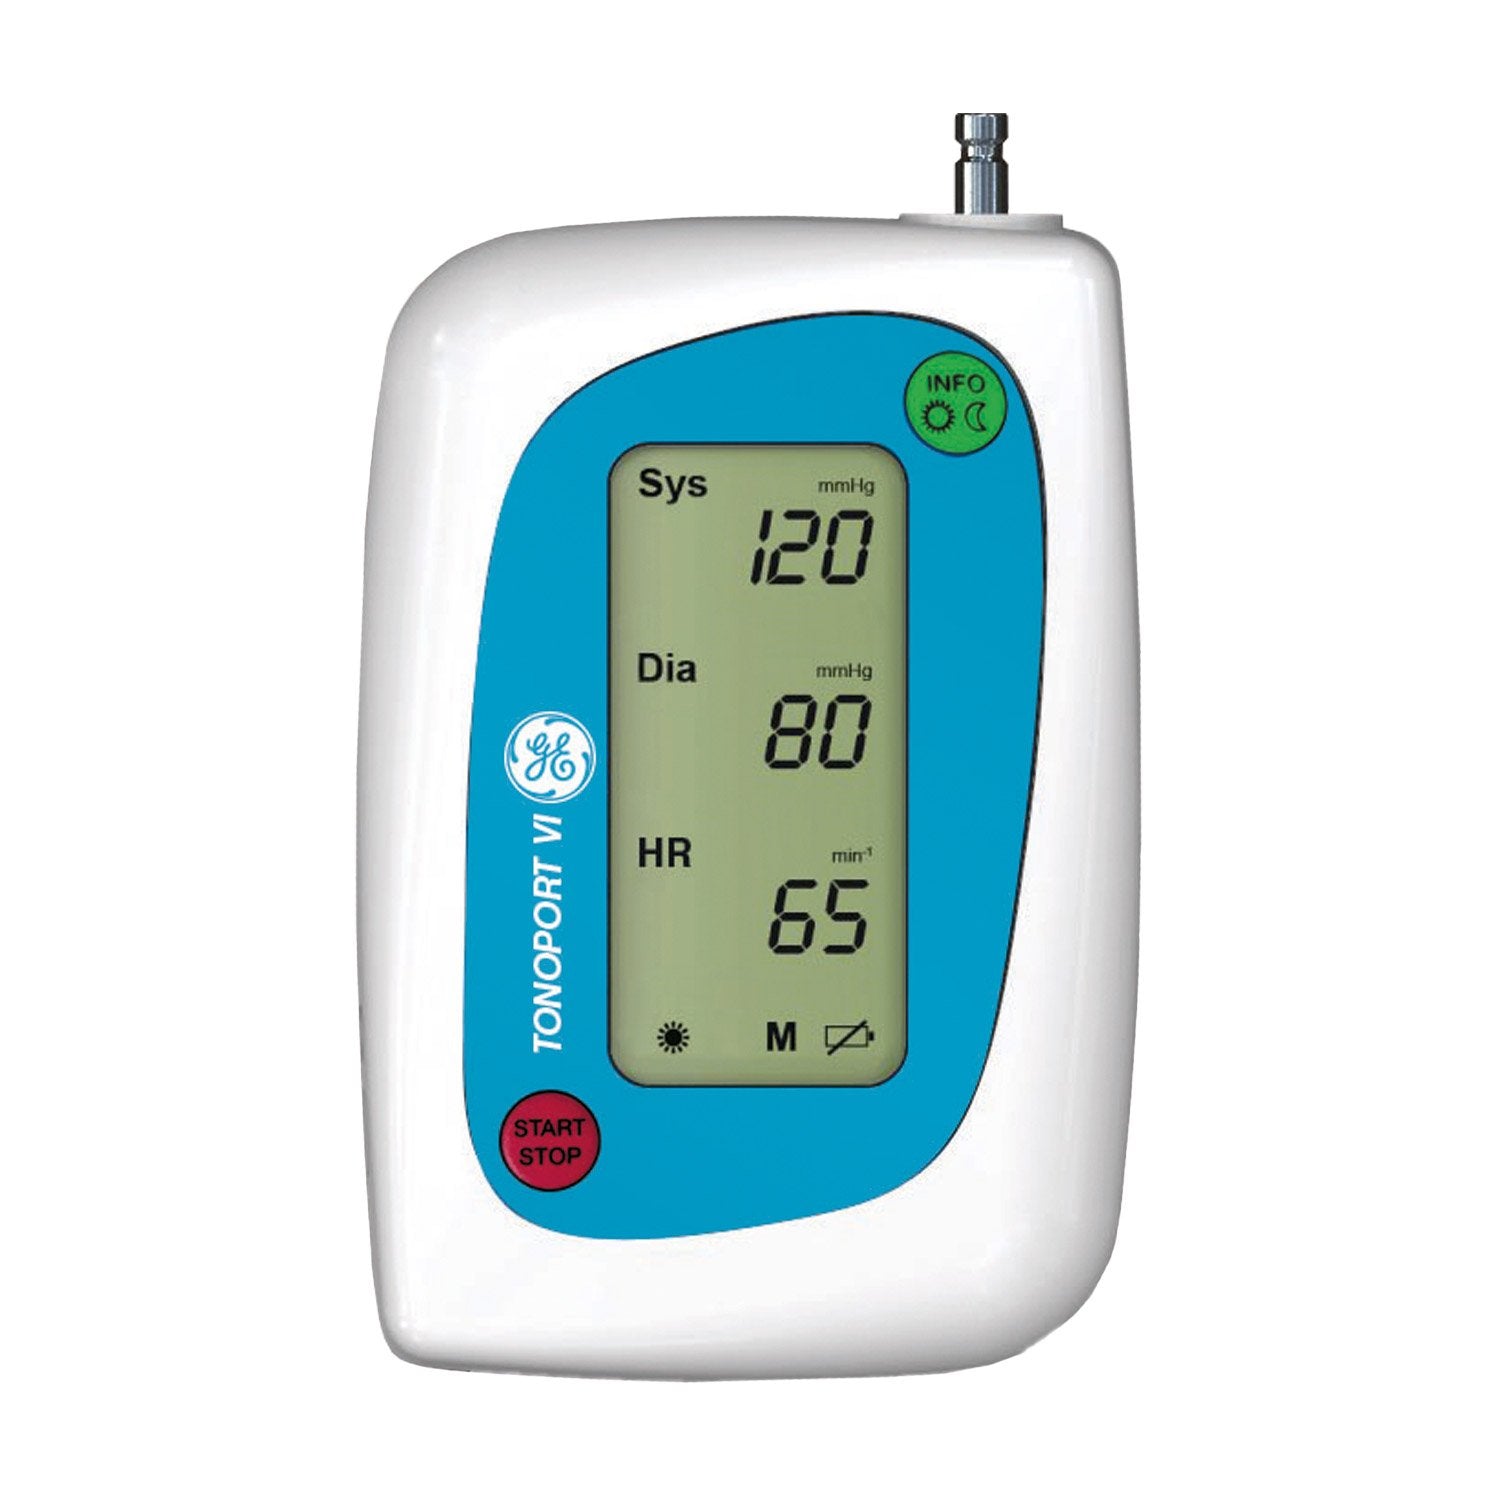 Tonoport™ Vi Long-Term Blood Pressure Monitor Available With Or Without Cardiosoft Software